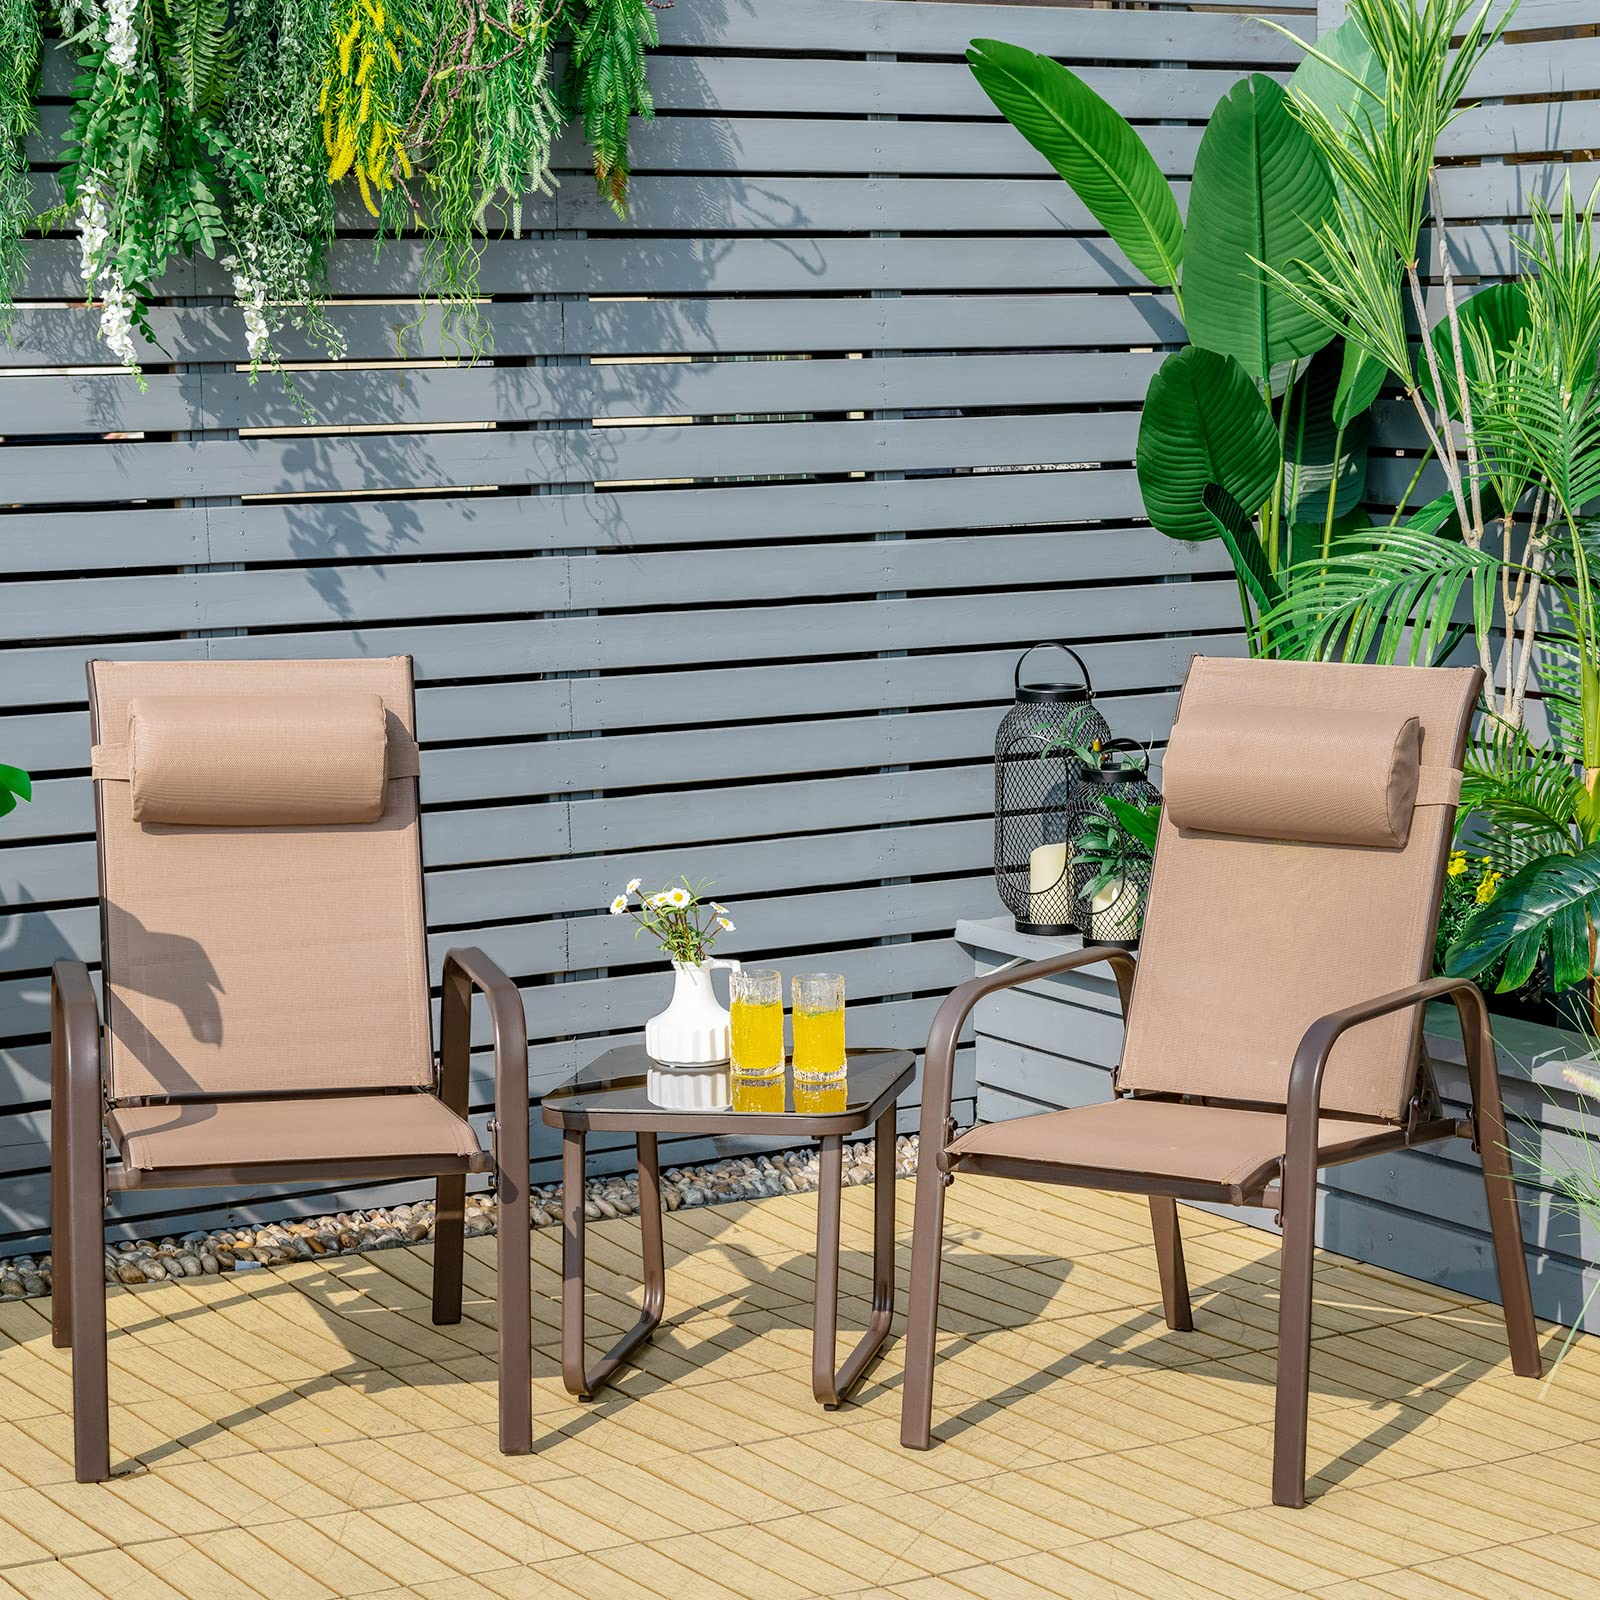 Giantex Stackable Patio Chairs with Adjustable Backrest Headrest, 3 Pieces